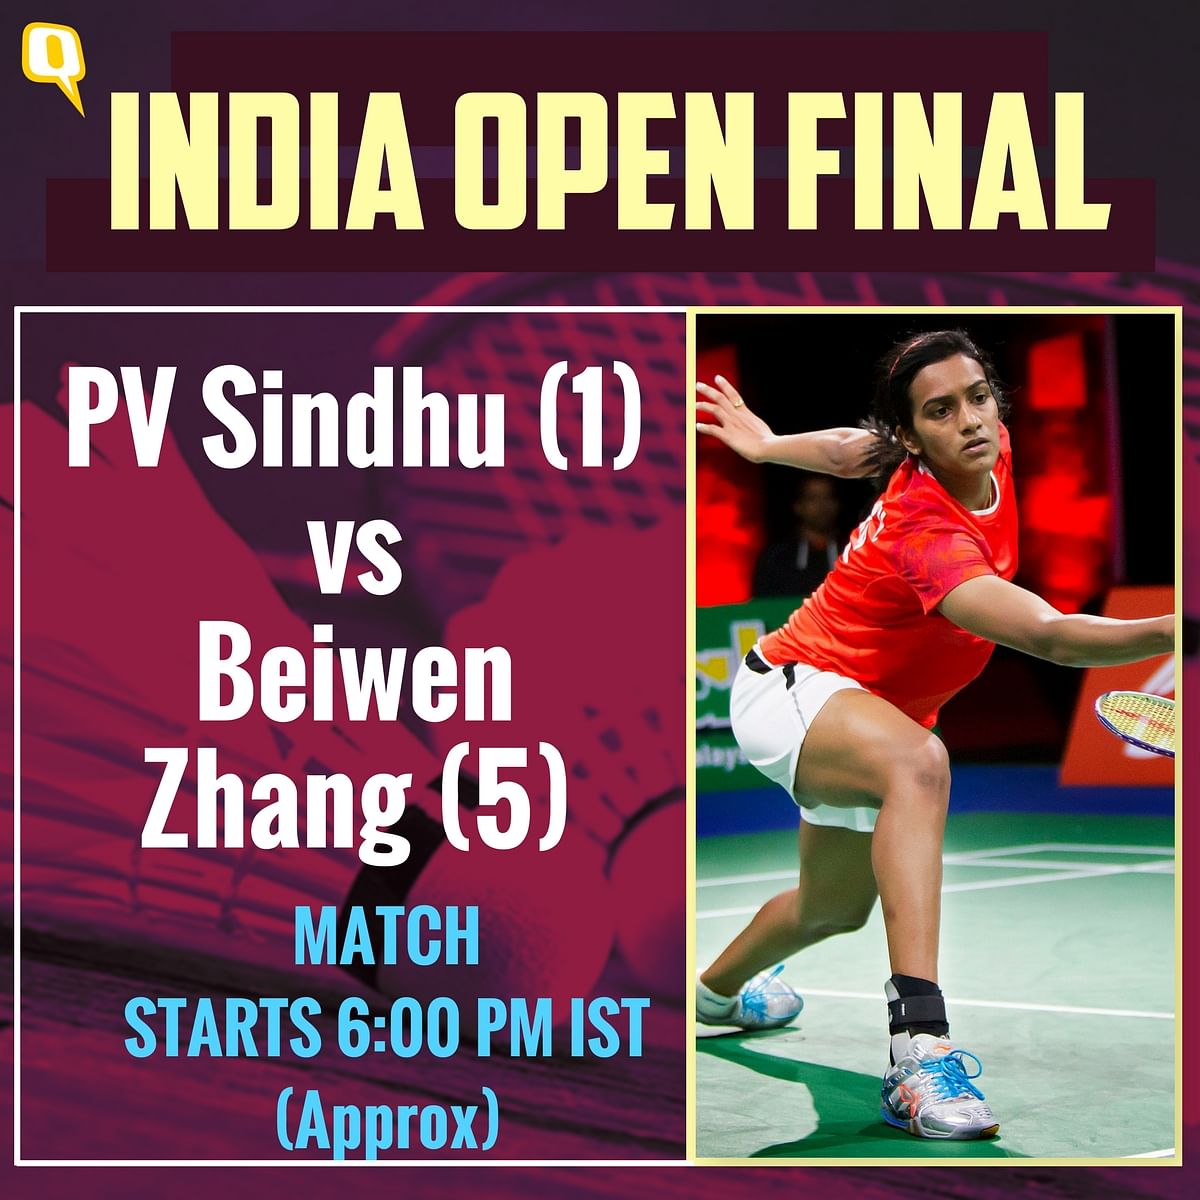 Defending champion PV Sindhu defeated Thailand’s Ratchanok Inthanon in semi-final of the India Open.